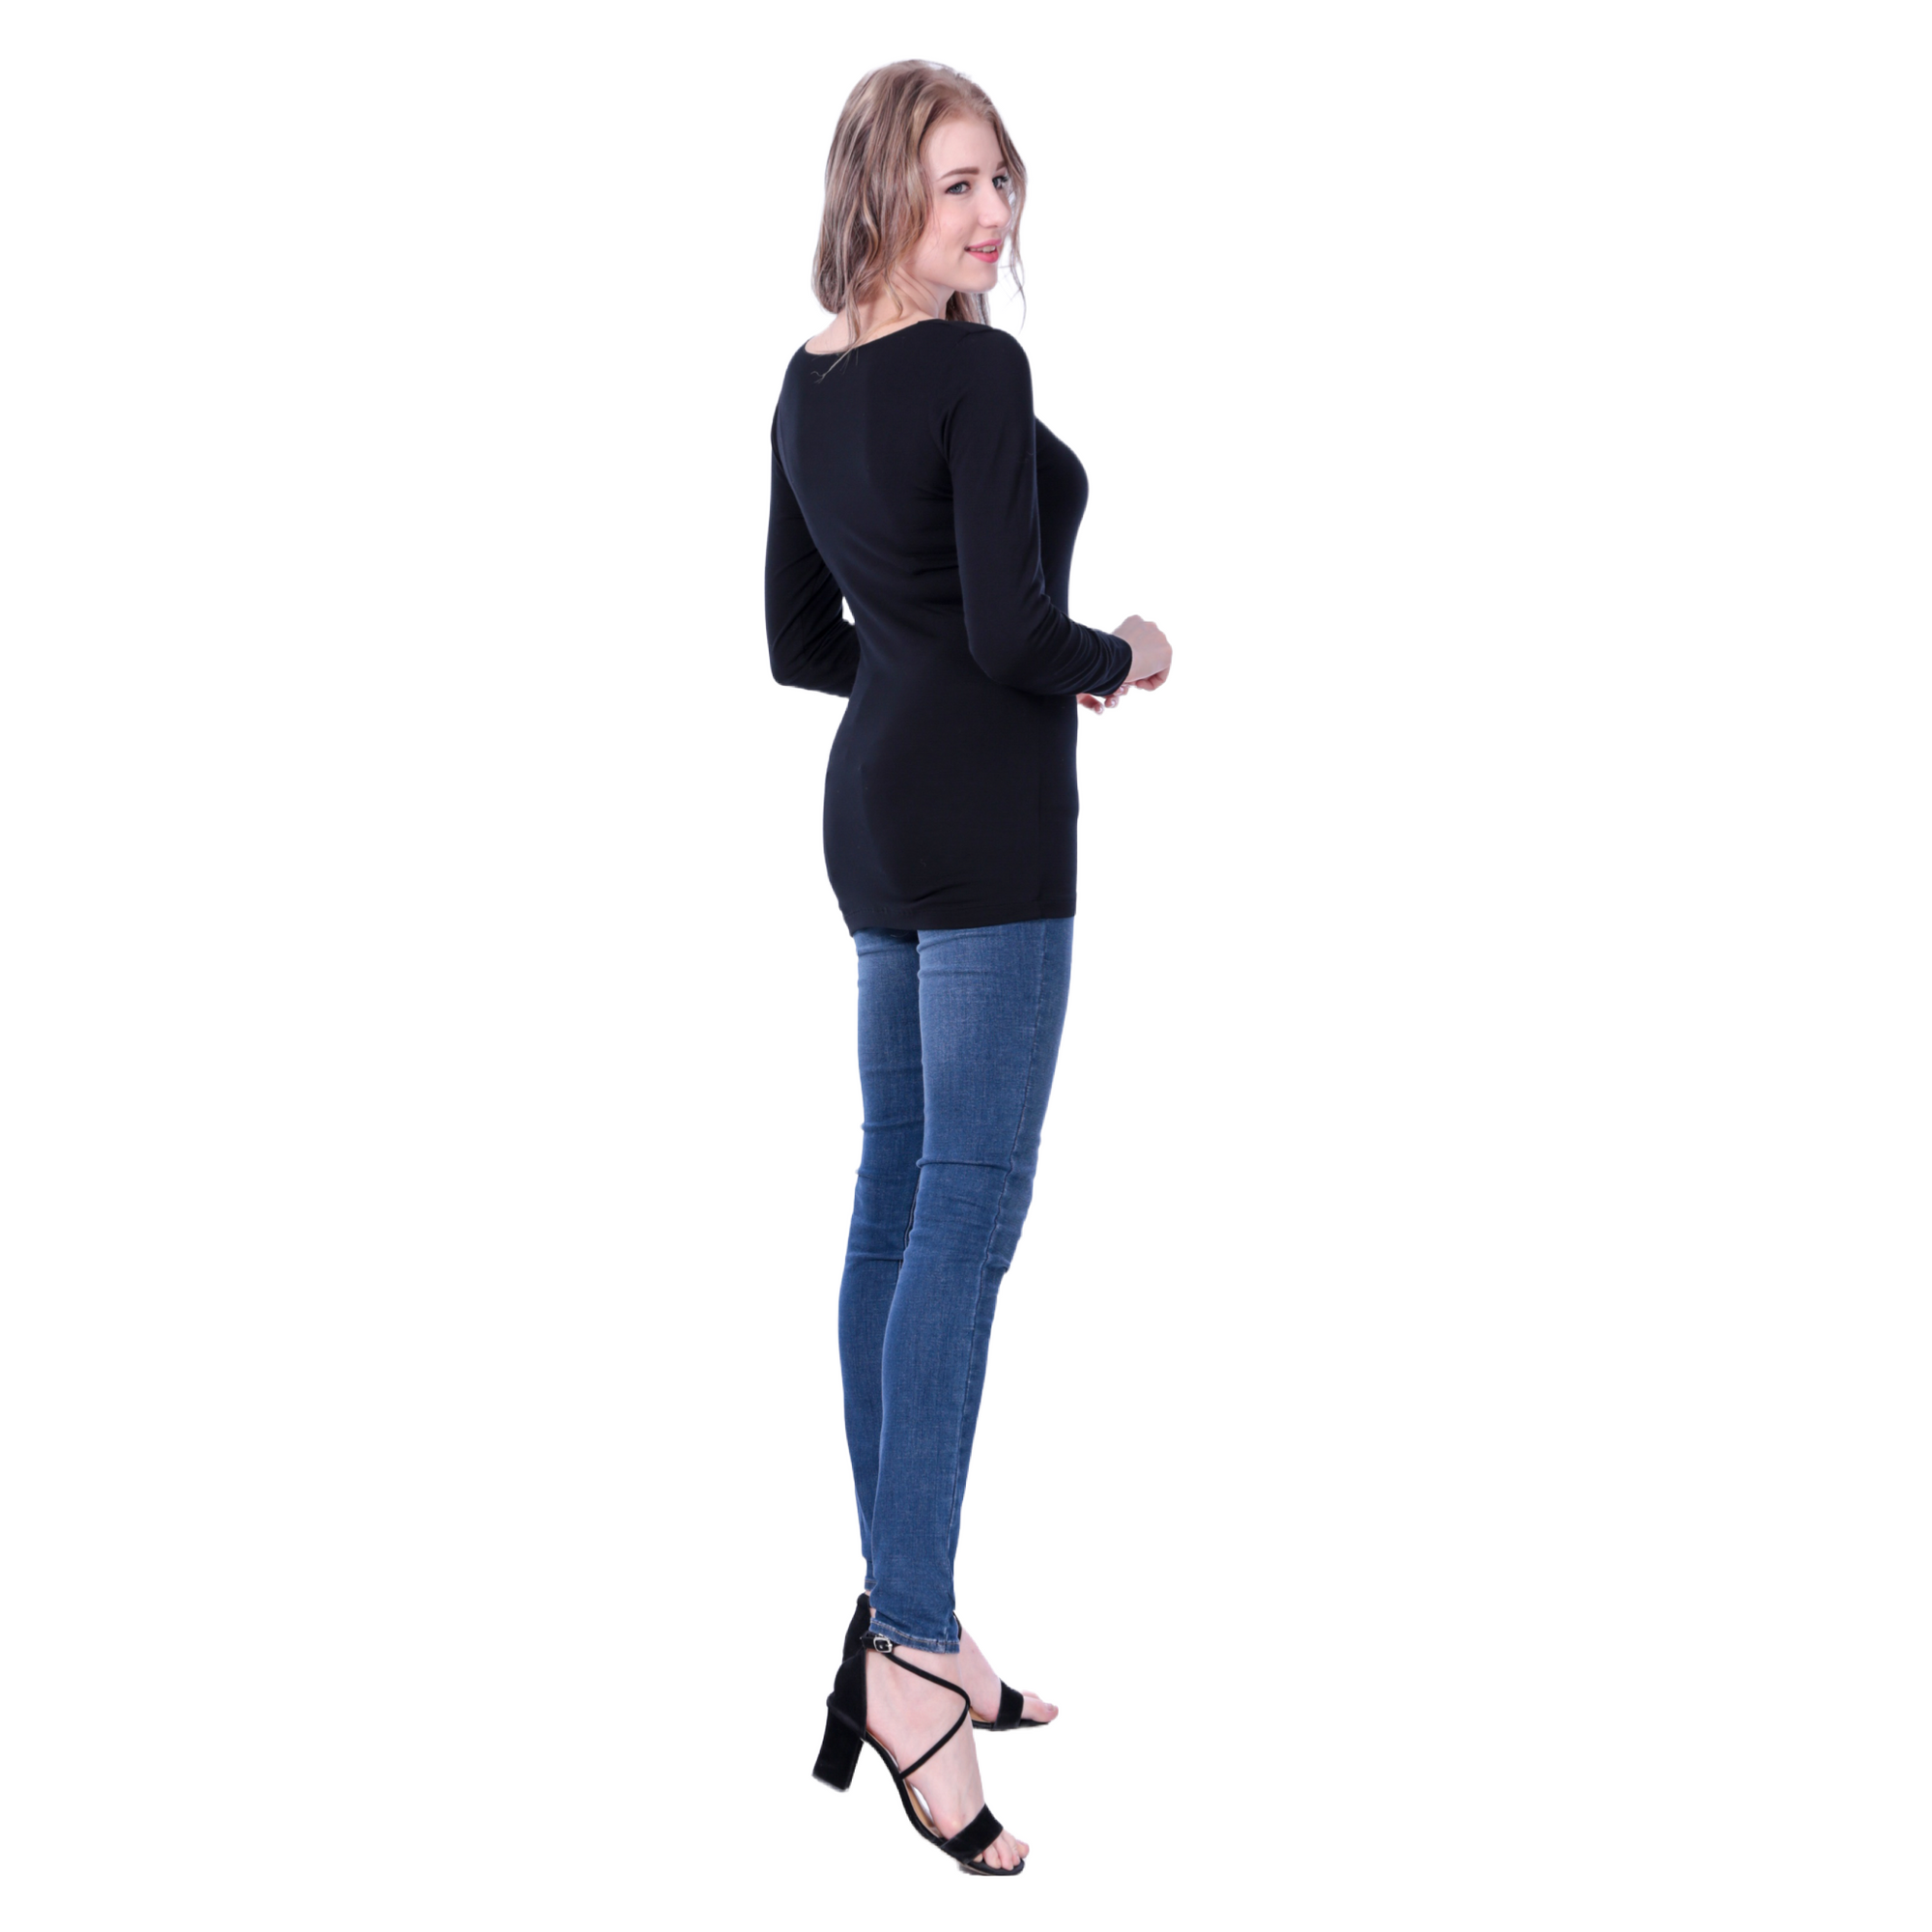 Classic Colors Fitted Long Sleeve Scoop Neck Stretchy Rayon Top